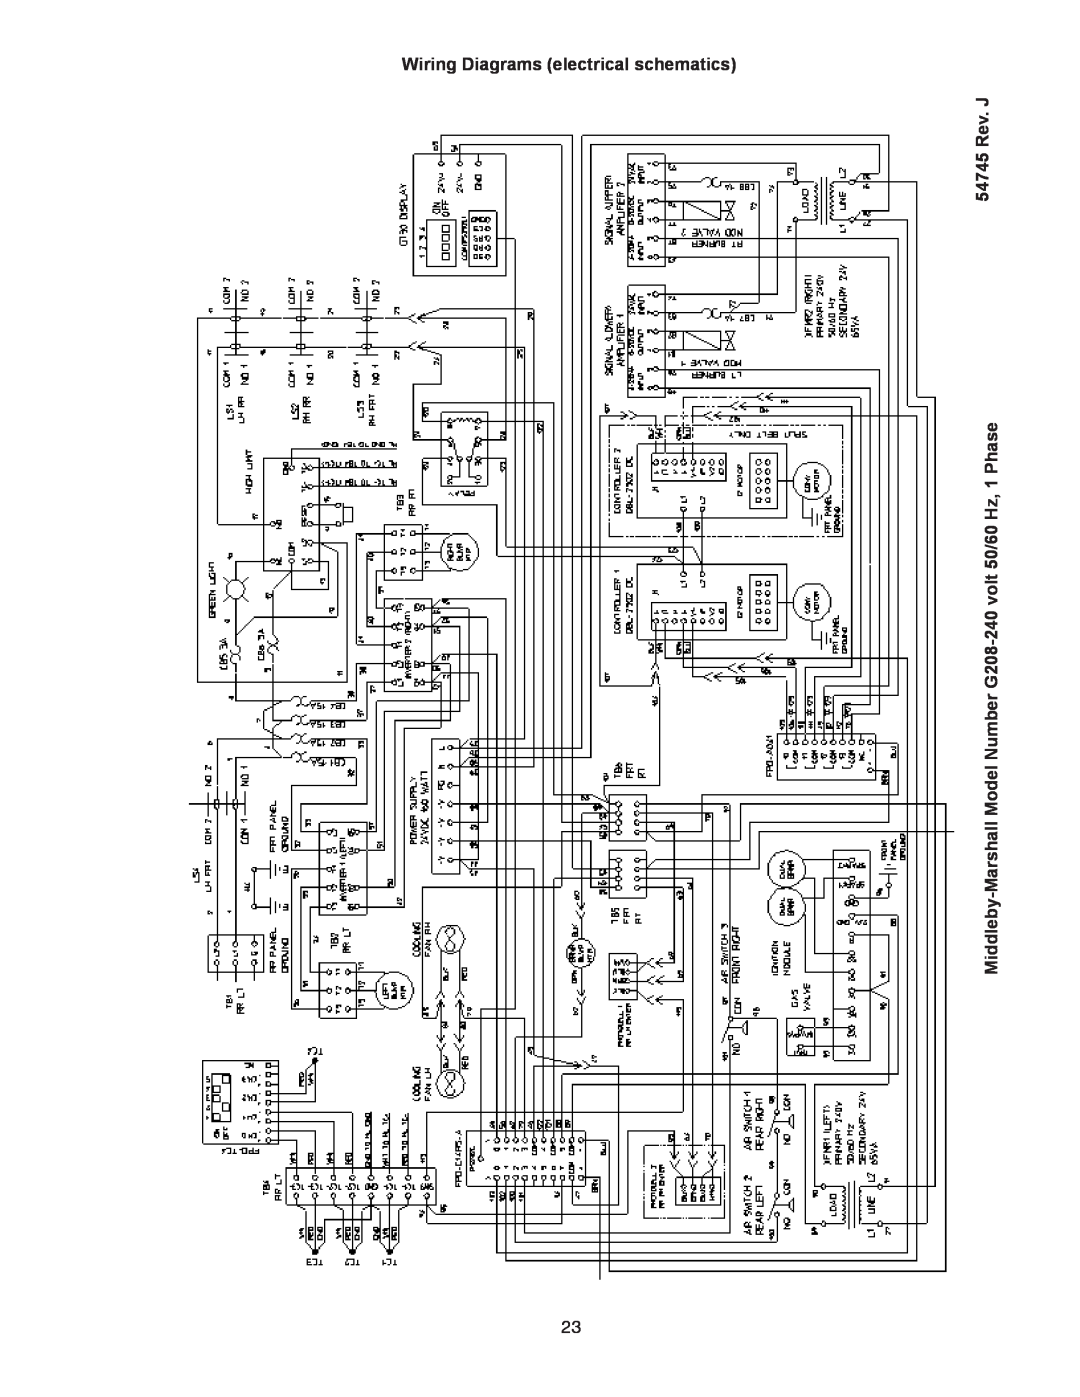 Middleby Cooking Systems Group PS770 installation manual schematics, 54745 Rev. J, Wiring Diagrams electrical 